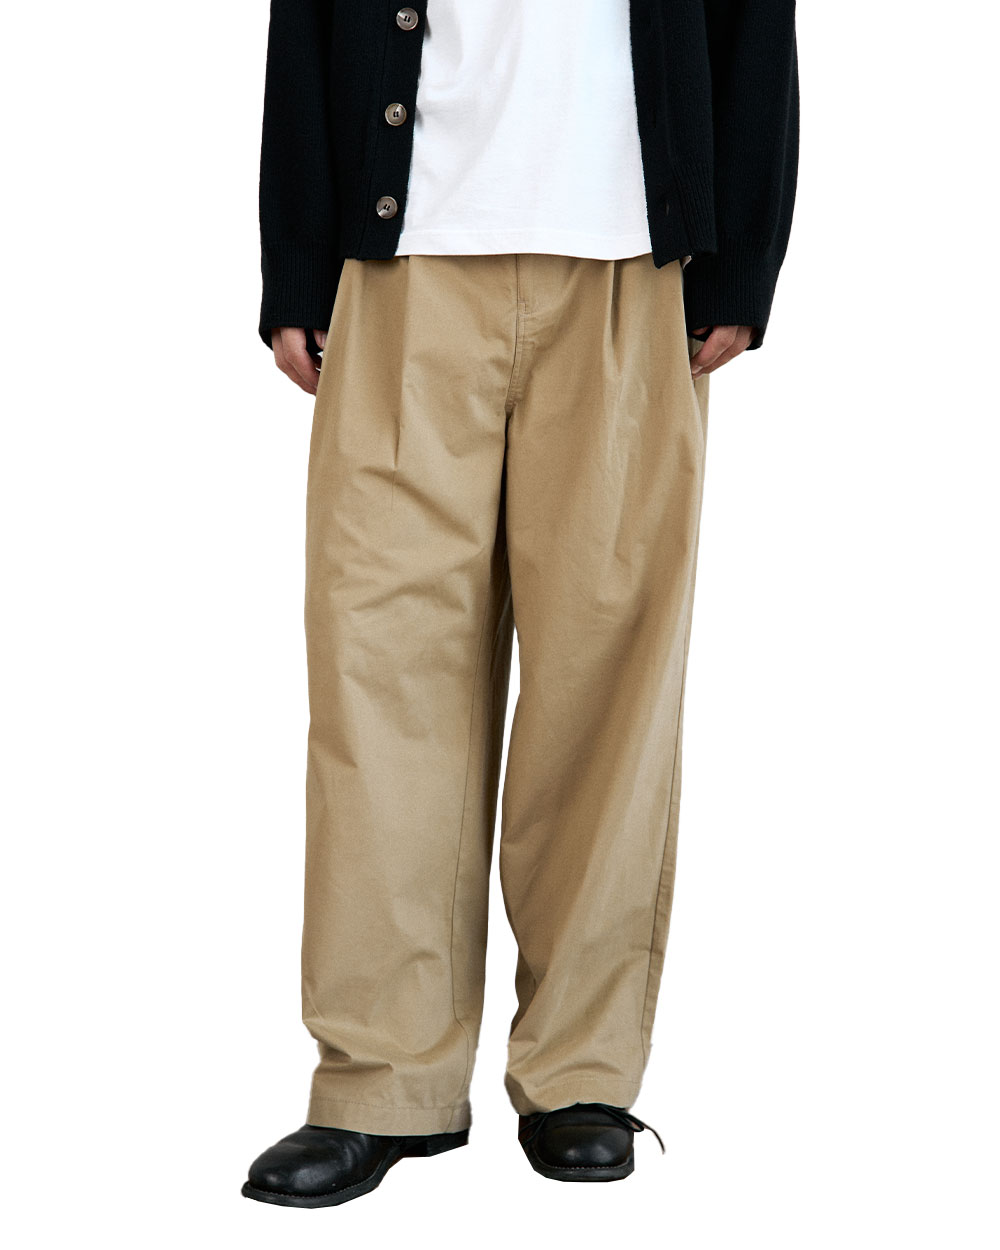 Wide Two Tuck Chino Pants (Beige)